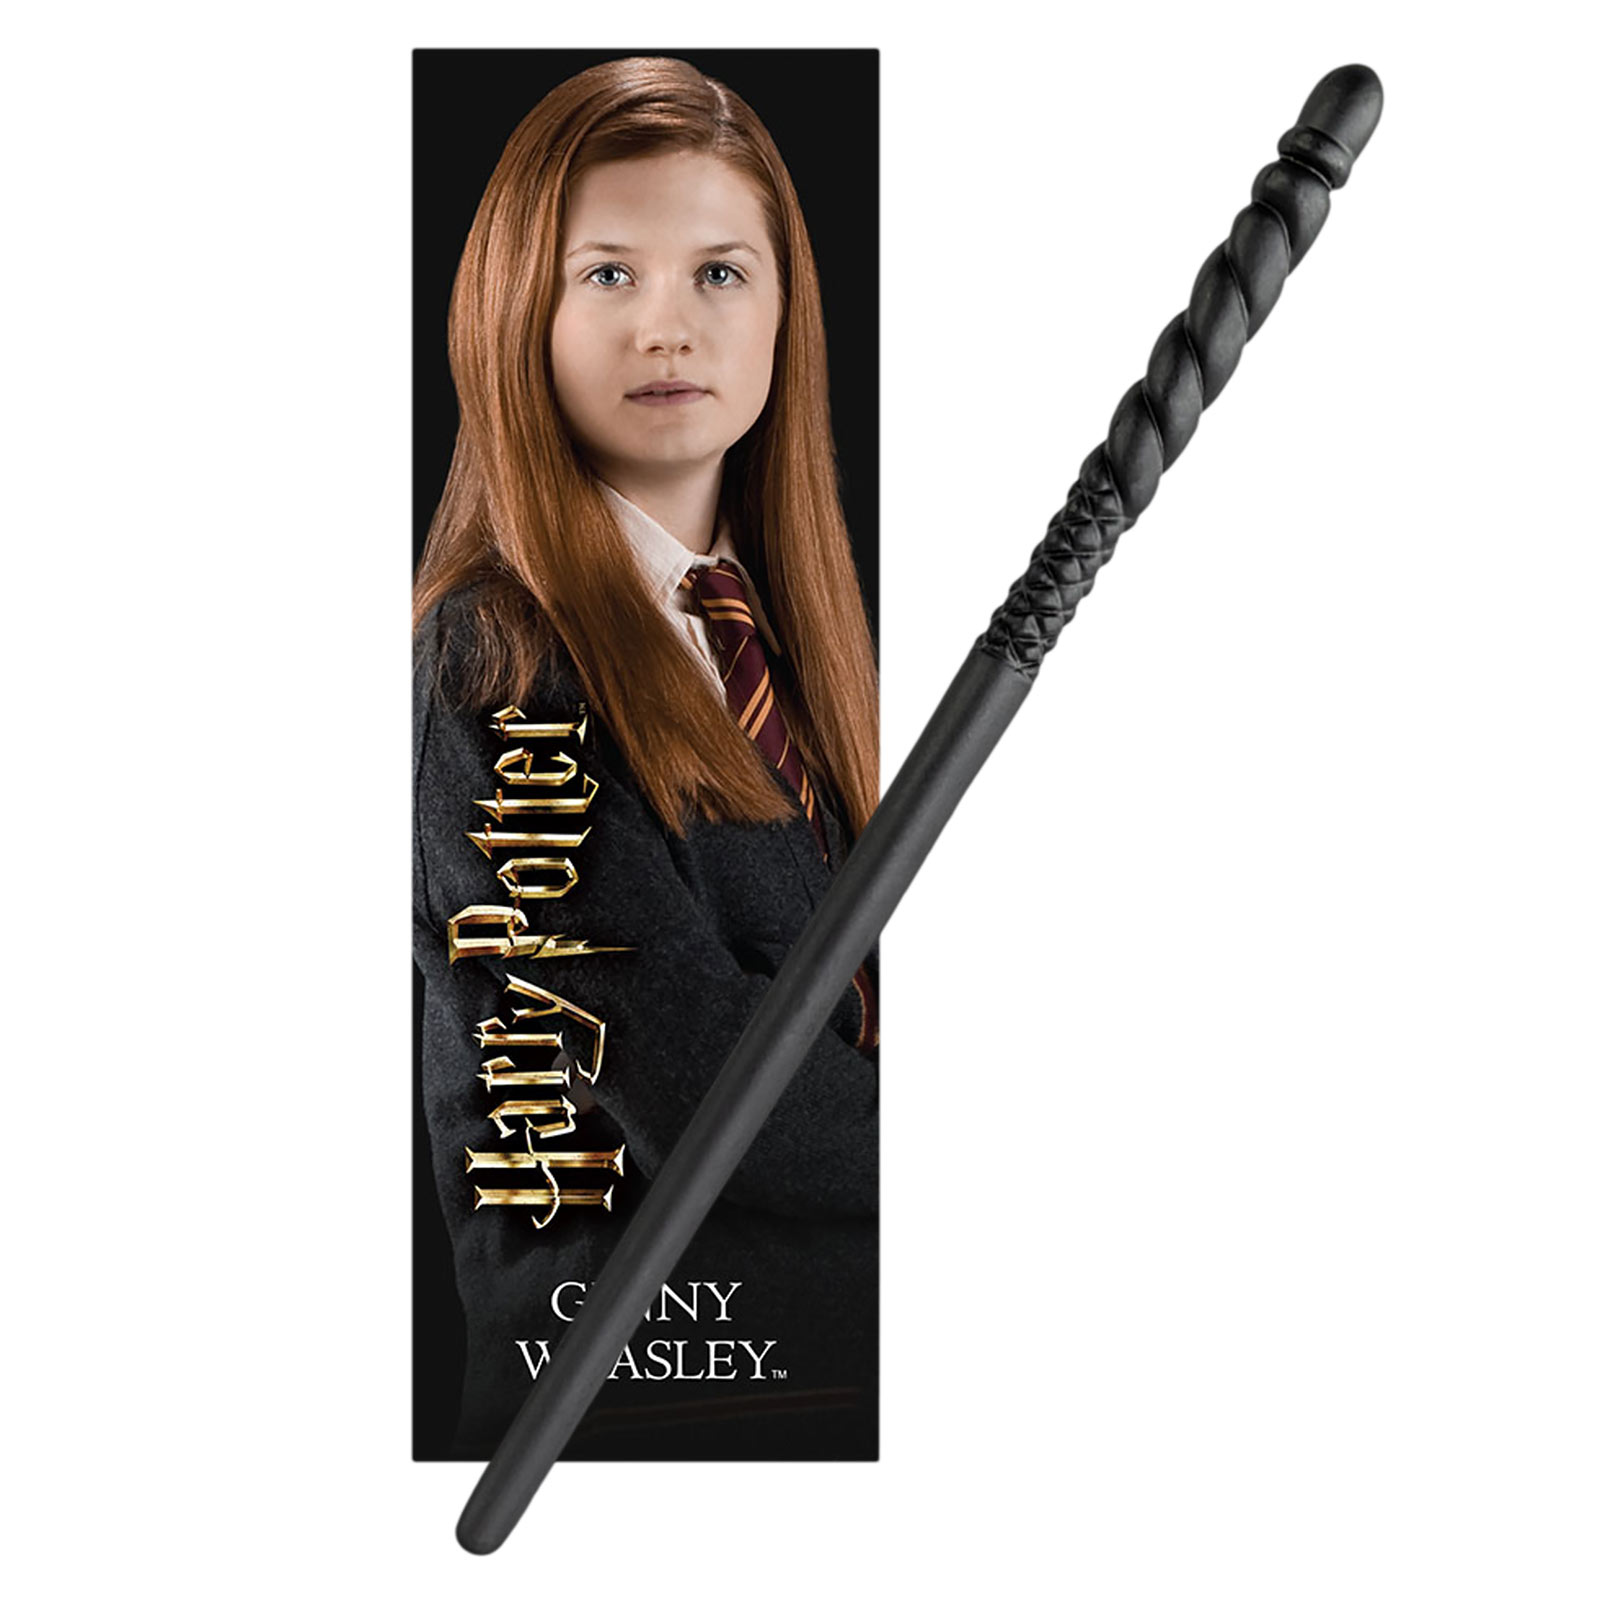 Ginny Wand for Young Wizards with Bookmark - Harry Potter